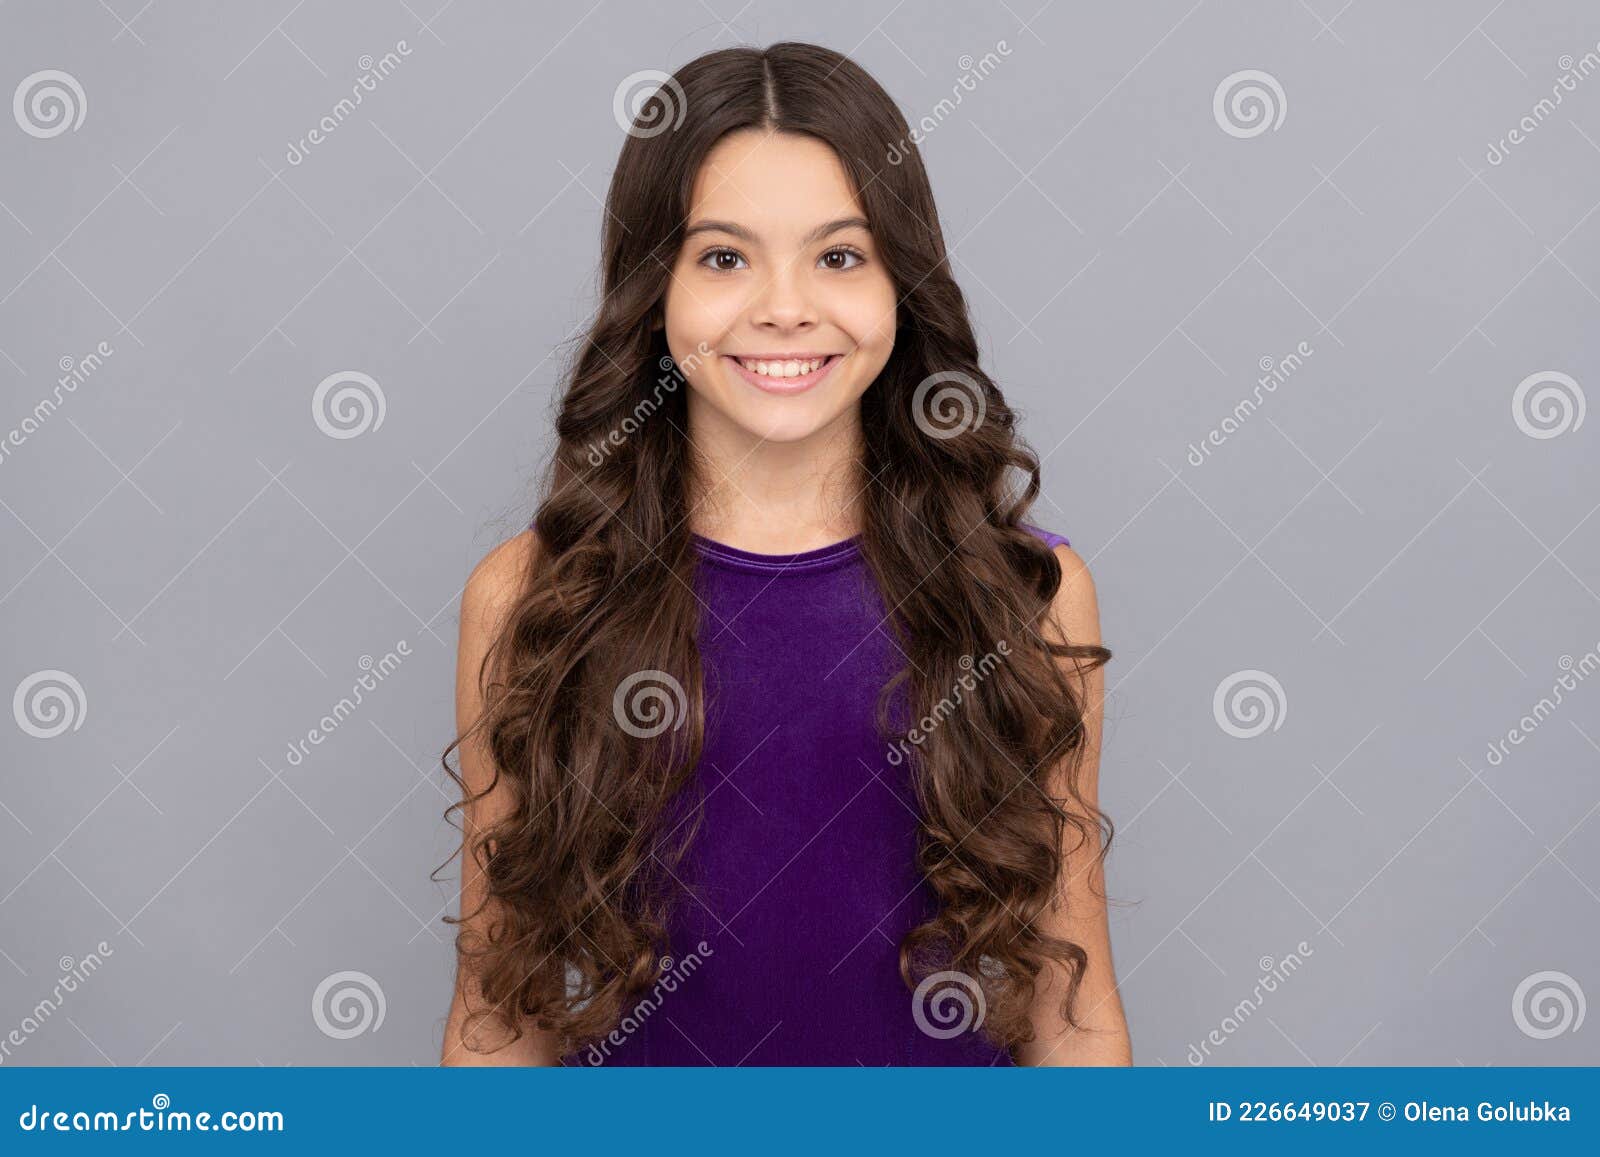 Portrait of Frizz Child in Purple Dress. Kid with Curly Hair. Teen Beauty  Hairstyle Stock Image - Image of pretty, female: 226649037